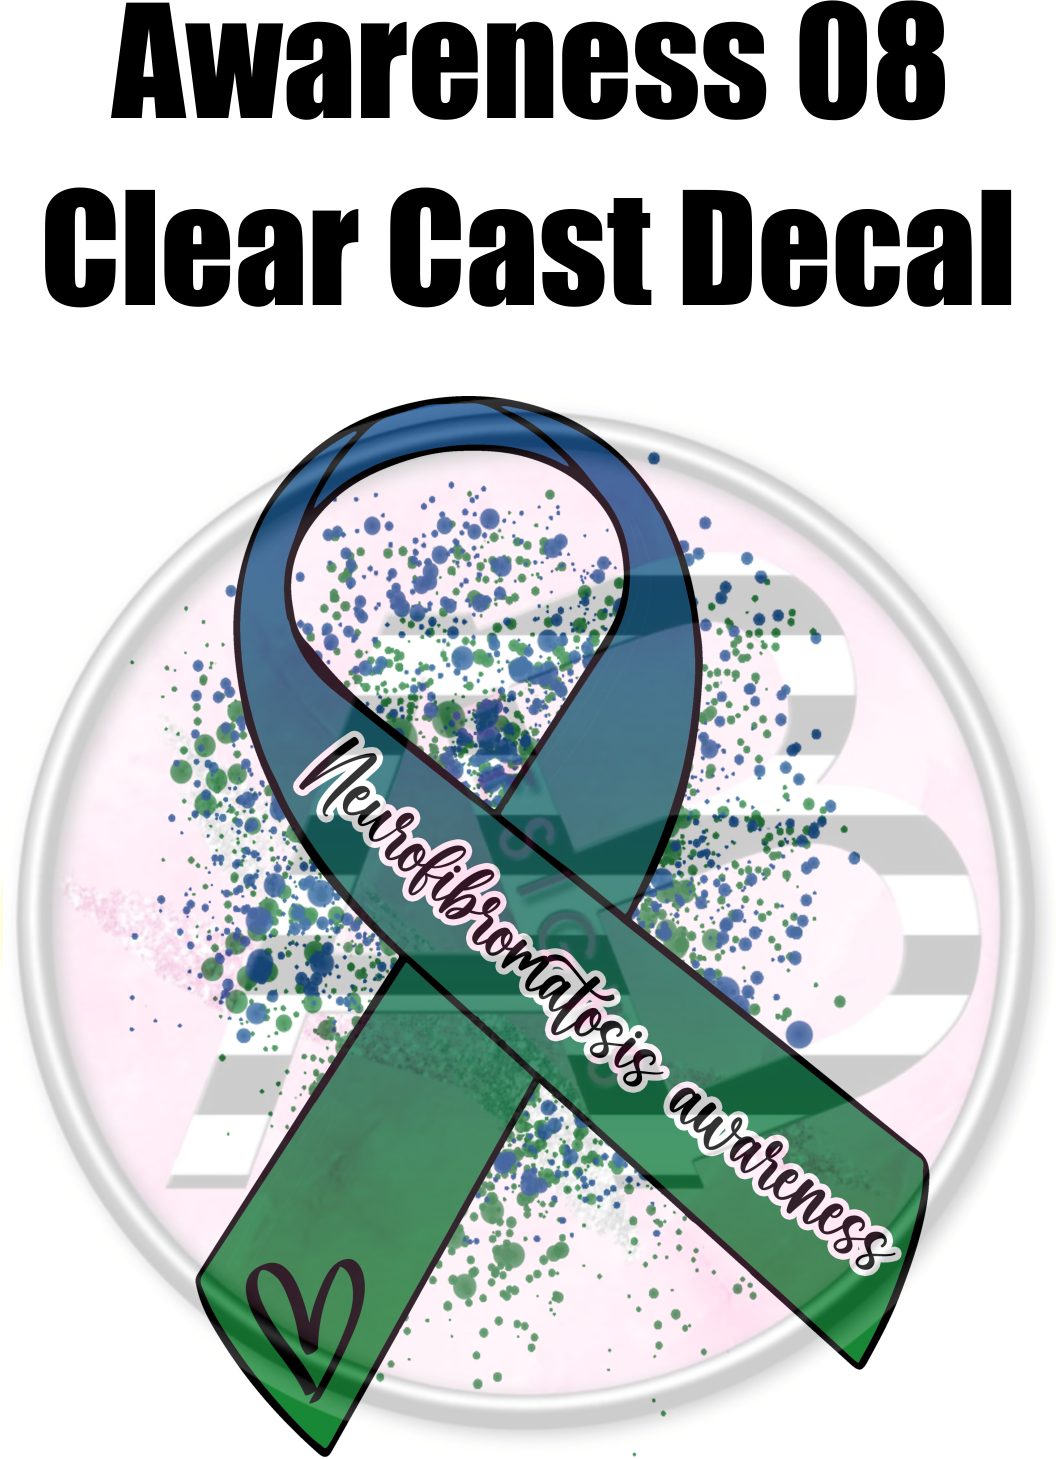 Awareness 08 - Clear Cast Decal - 88